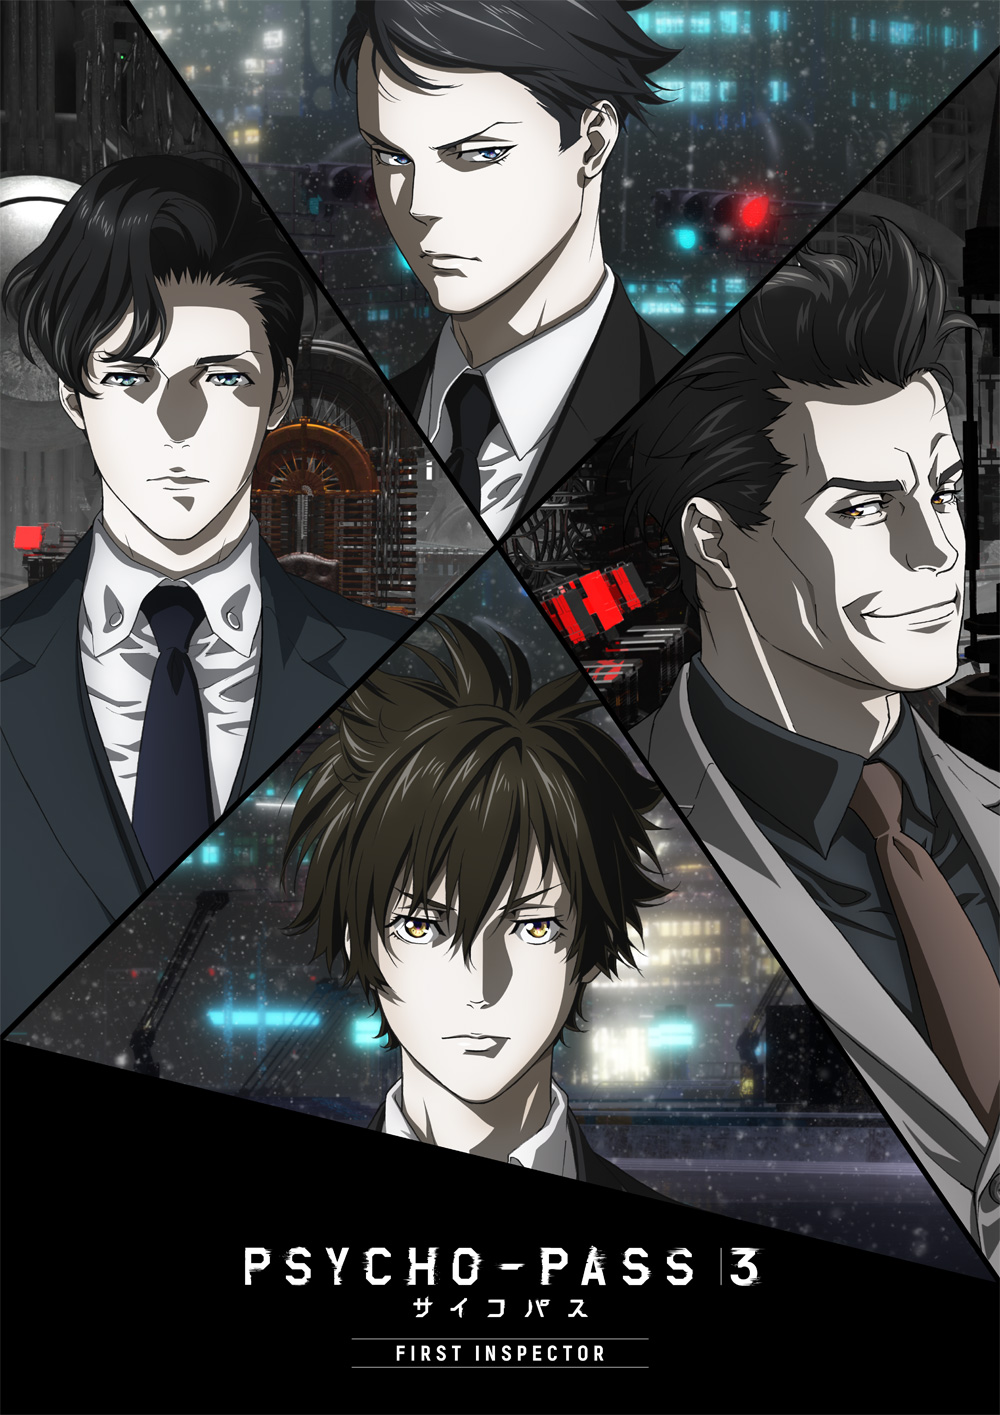 Who Ya Extended Release Psycho Pass 3 First Inspector Opening Theme Synthetic Sympathy Music Video Moshi Moshi Nippon もしもしにっぽん